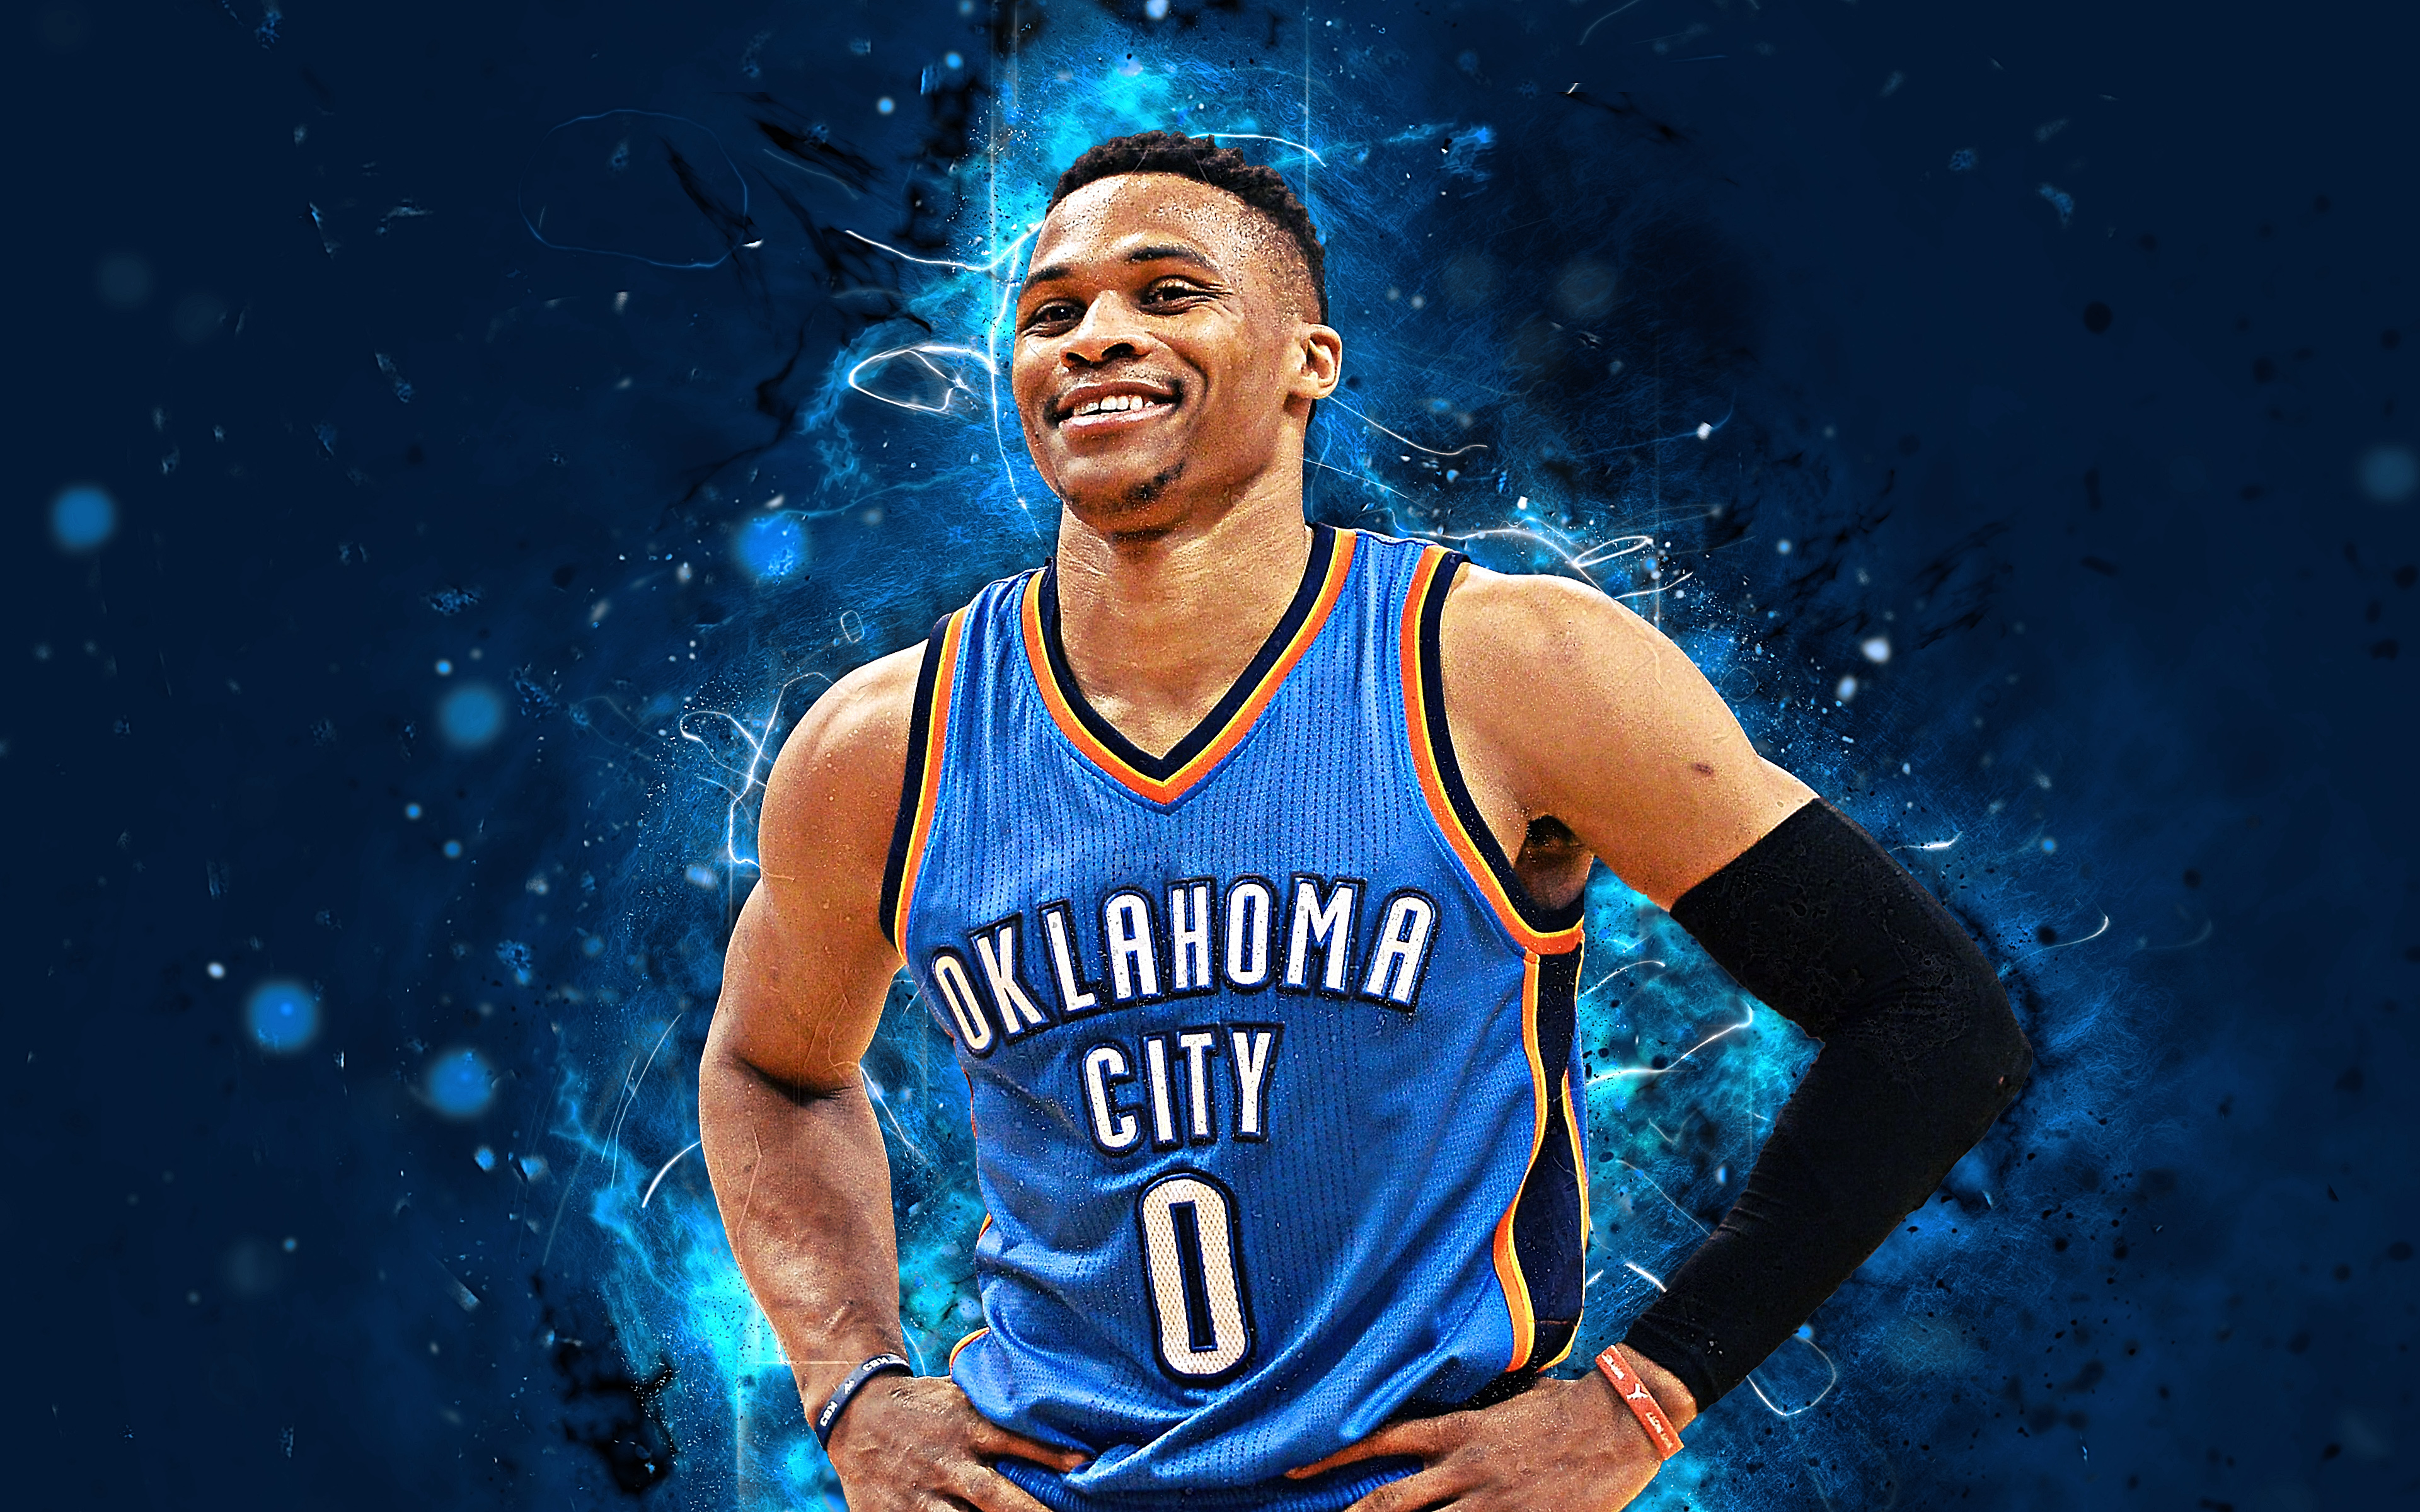  Wallpaper for Russell Westbrook APK for Android Download